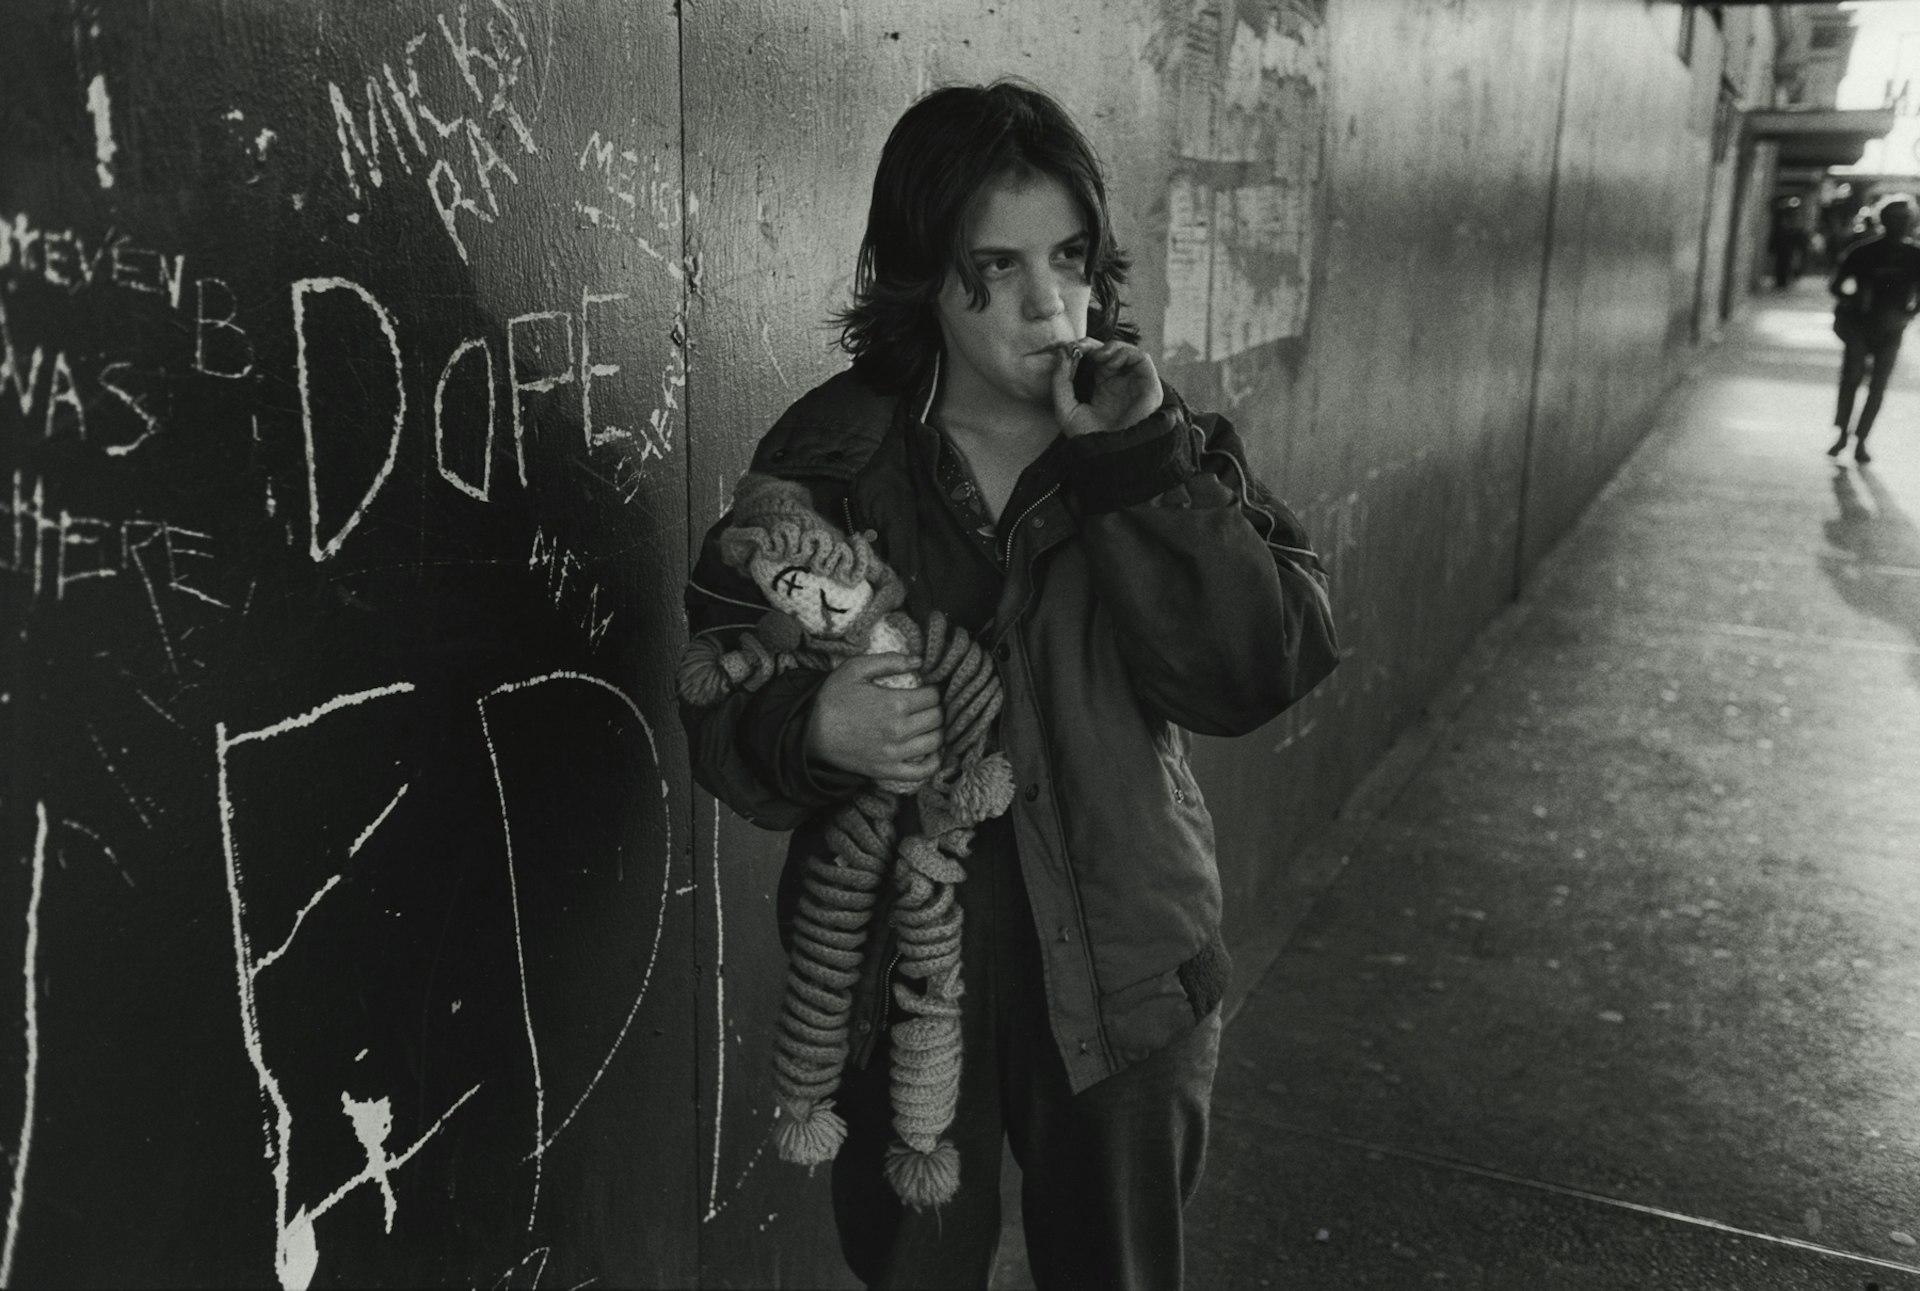 Lillie with her rag doll. Seattle, Washington From the series Streetwise, 1983 © Mary Ellen Mark/ Courtesy Howard Greenberg Gallery New York